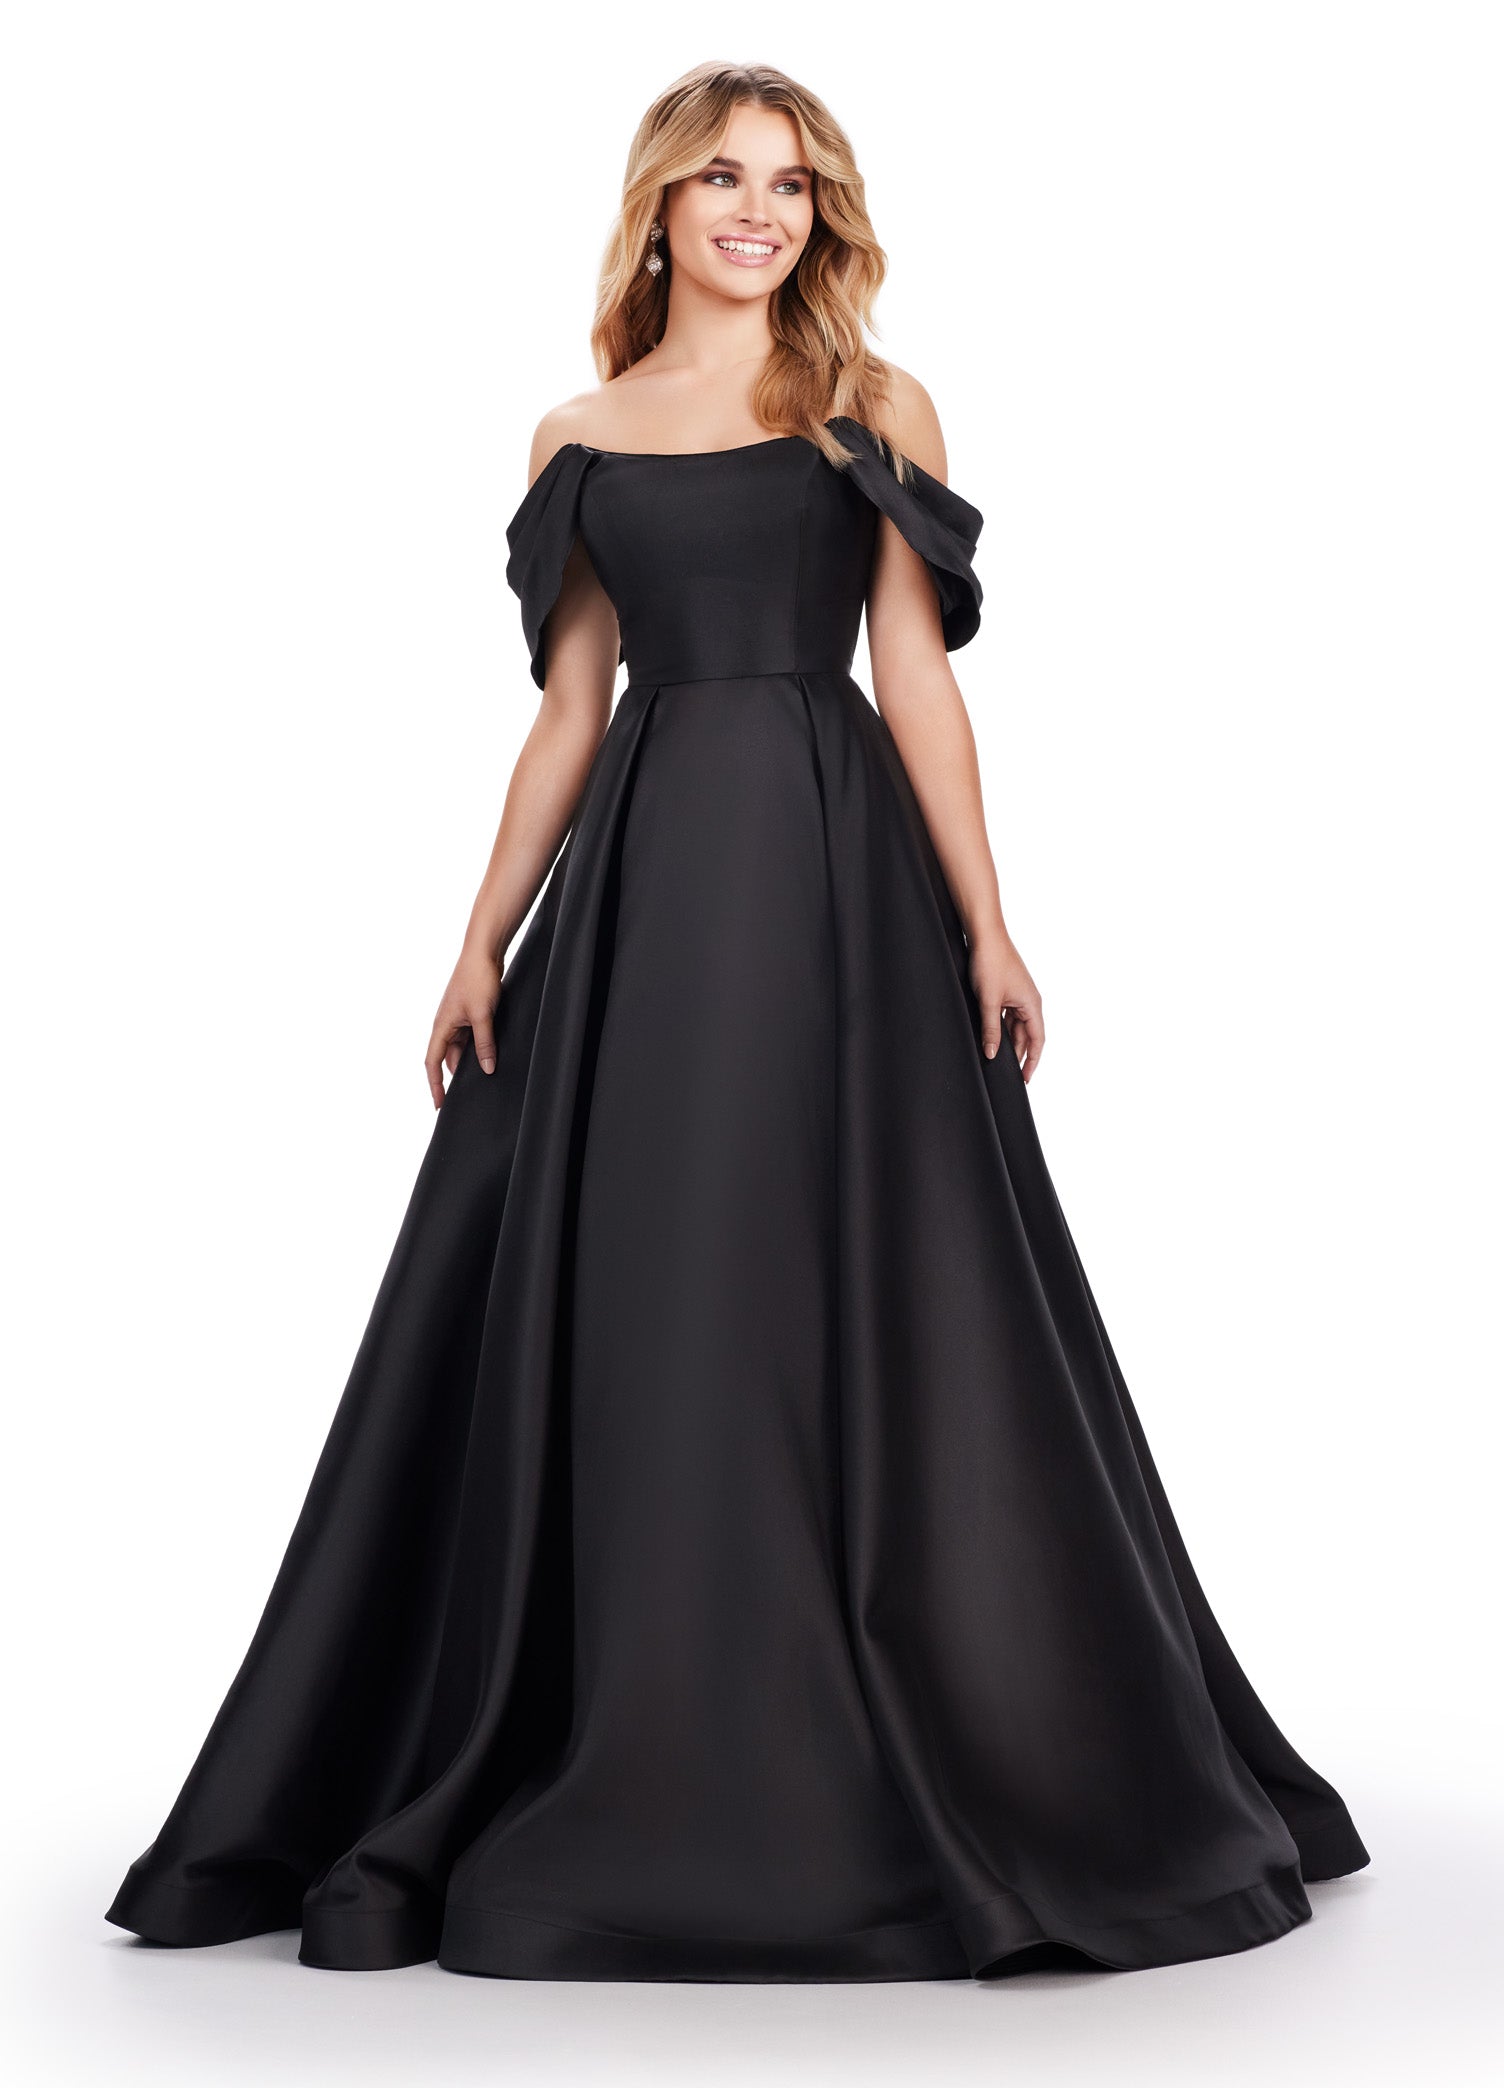 Expertly designed by Ashley Lauren, this stunning Prom Dress features an elegant off the shoulder neckline and a full ballgown skirt. Crafted with Mikado fabric, this formal evening gown exudes sophistication and style. Perfect for any special occasion, this dress is sure to make you stand out with its timeless design and impeccable fit. An off shoulder gown perfect for any event. This Mikado ball gown features a pleated off shoulder detail.